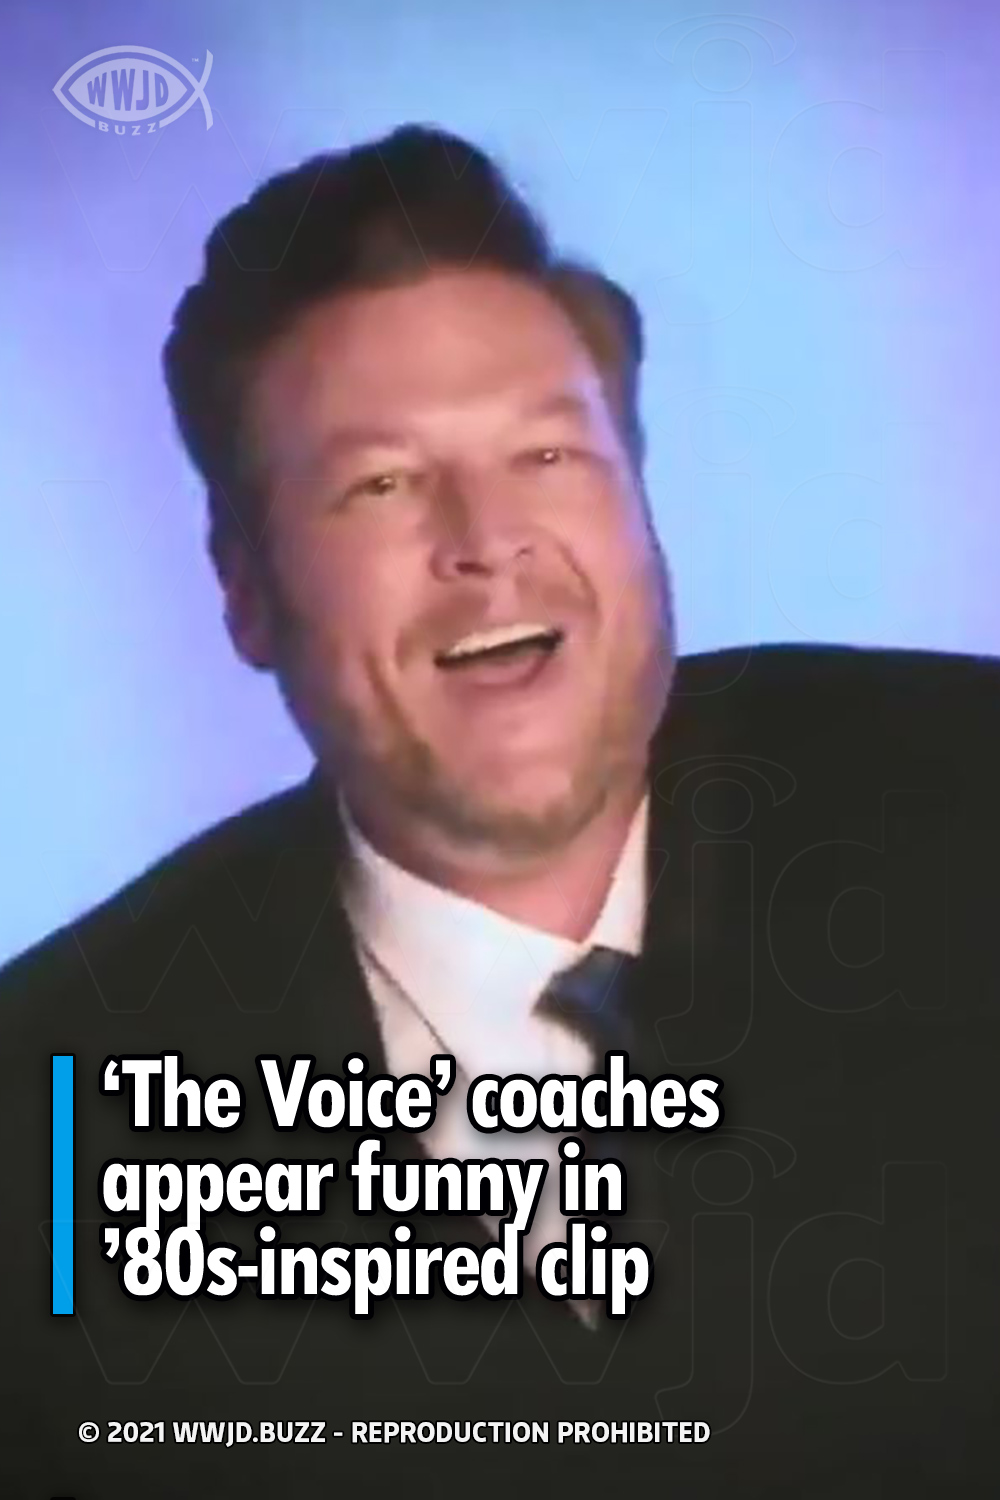 ‘The Voice’ coaches appear funny in ’80s-inspired clip